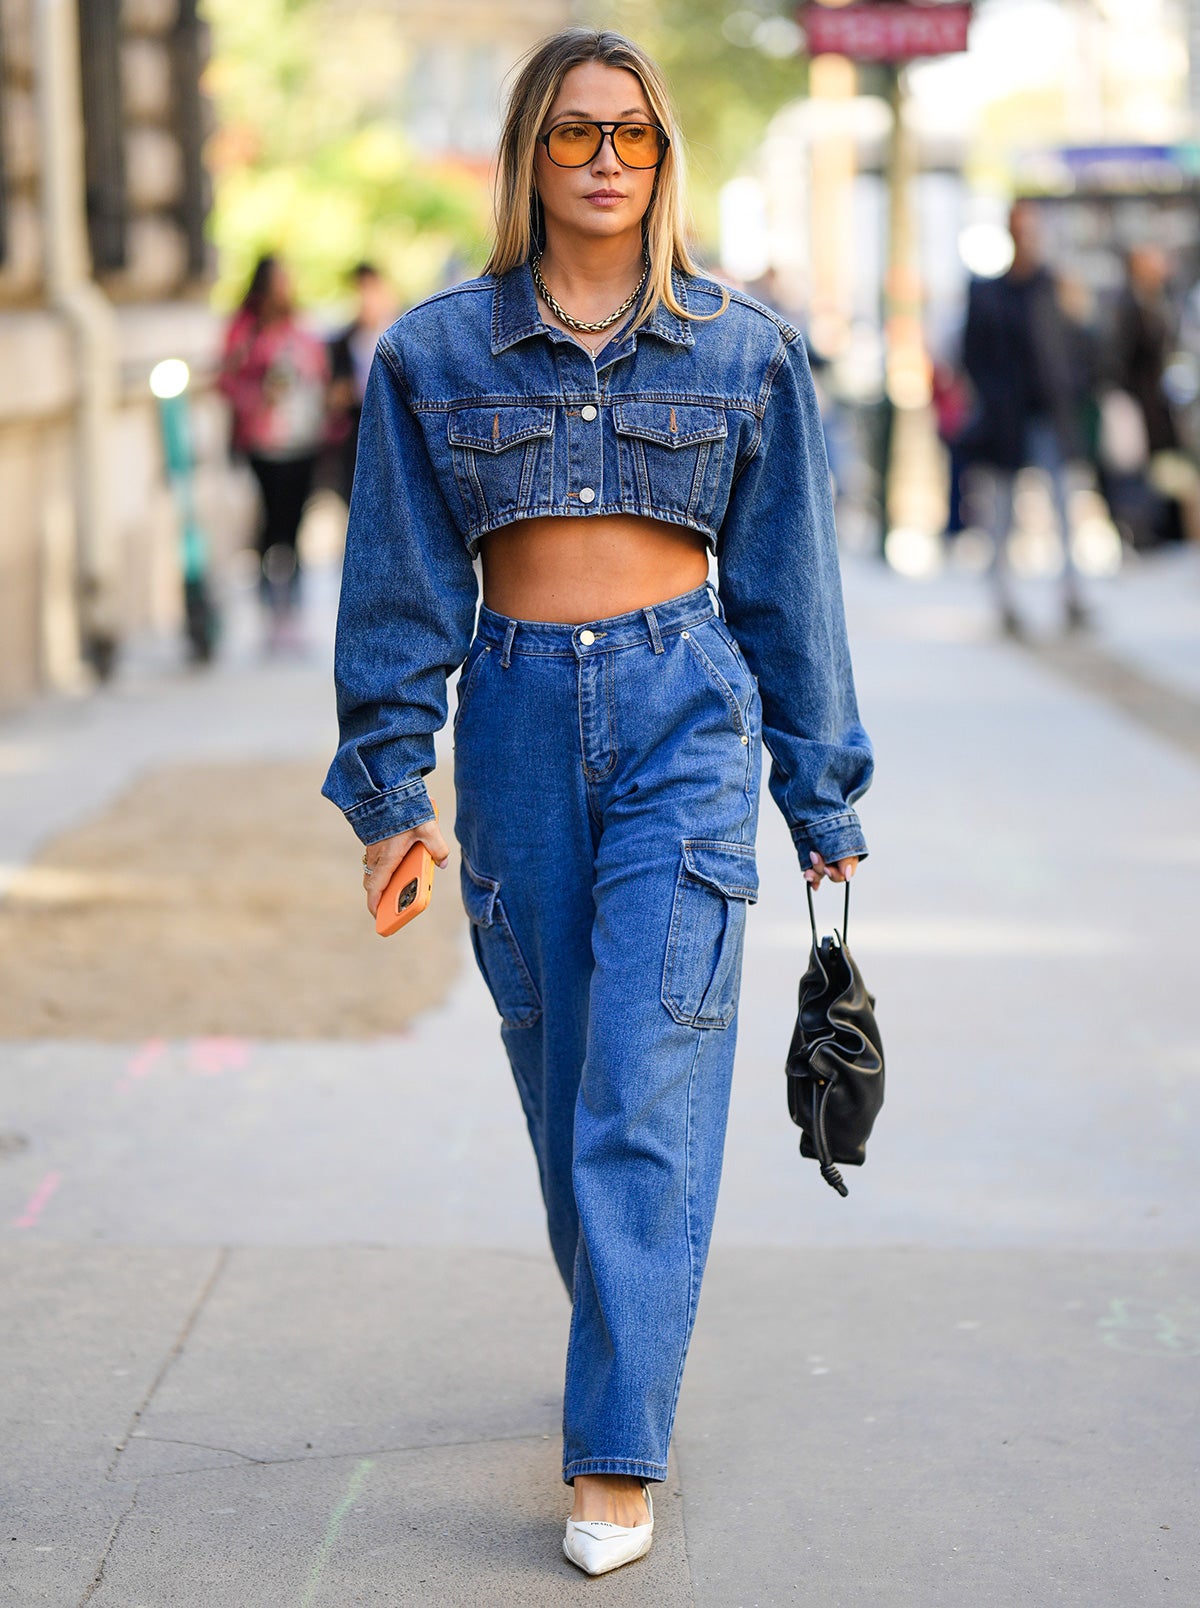 Fall 2022 Denim Jeans Guide: How To Style Types Of Denim | lupon.gov.ph